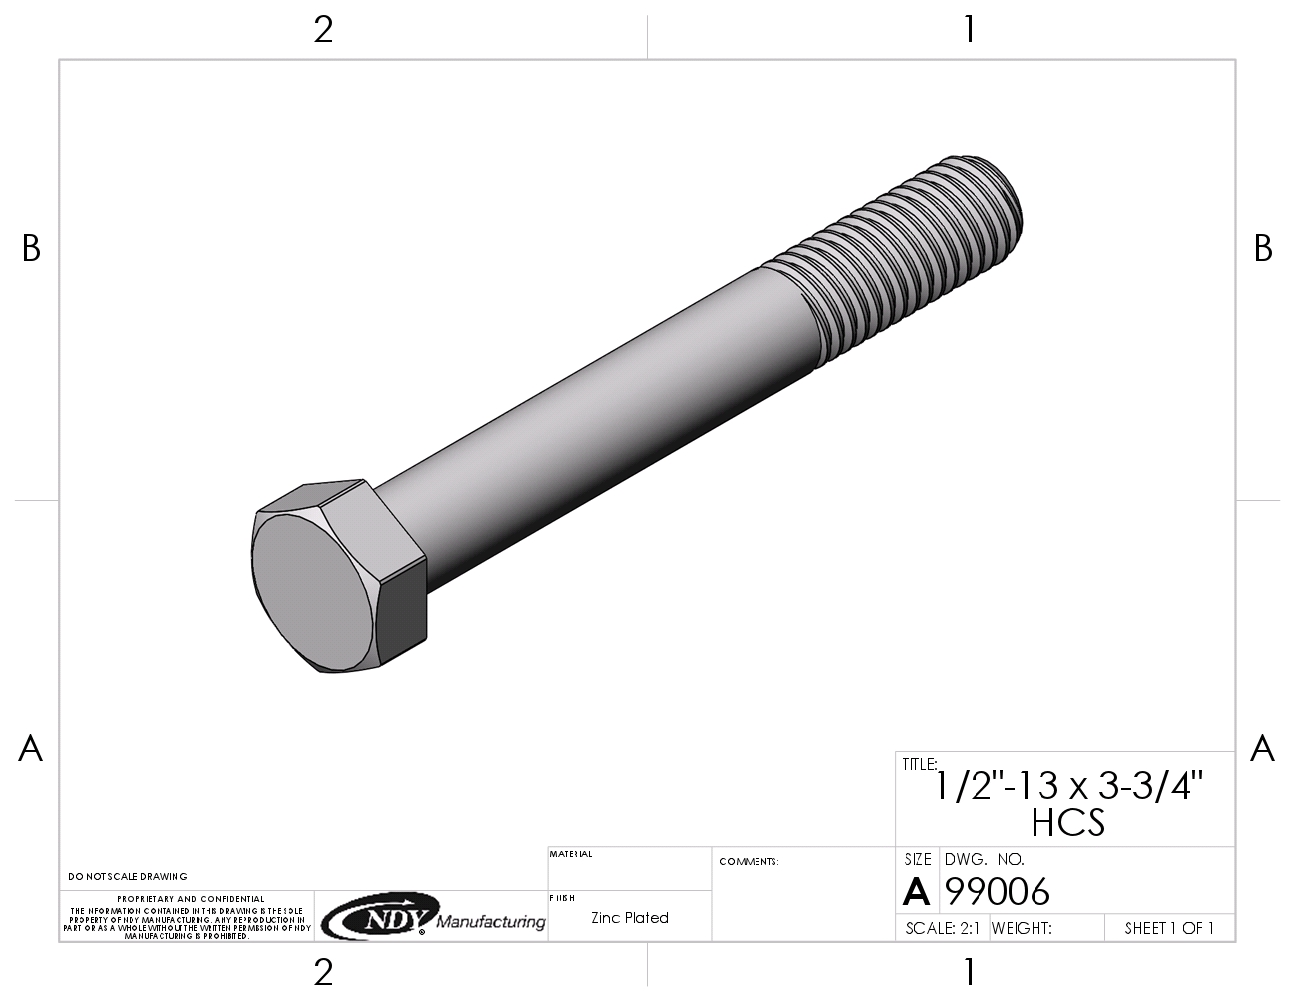 A drawing of a 1/2"-13 x 3-3/4" Carriage Bolt and nut.